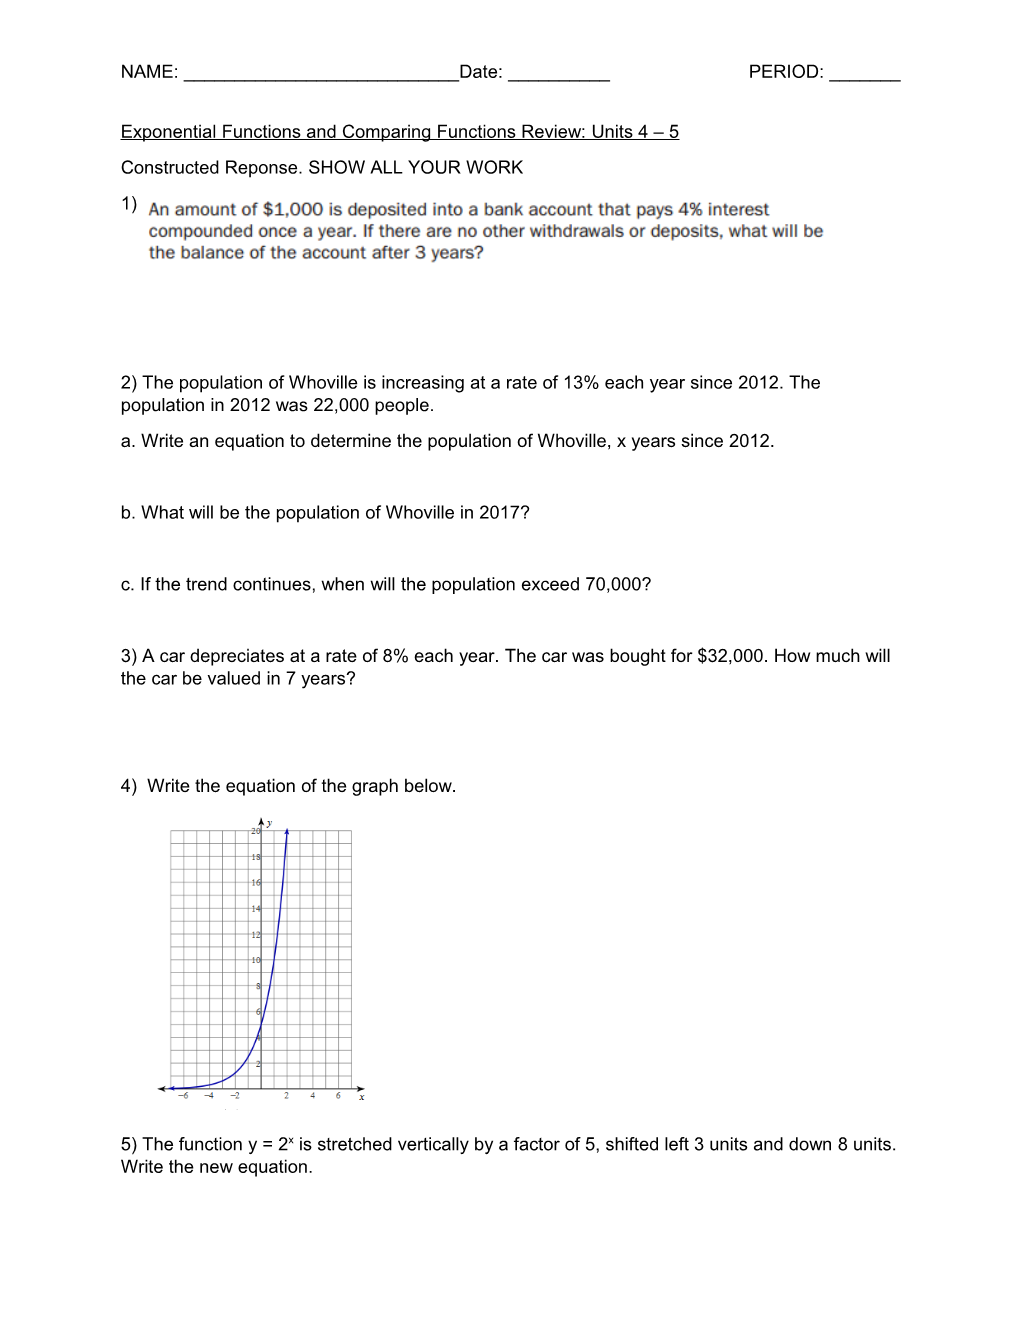 Exponential Functions and Comparing Functions Review: Units 4 5